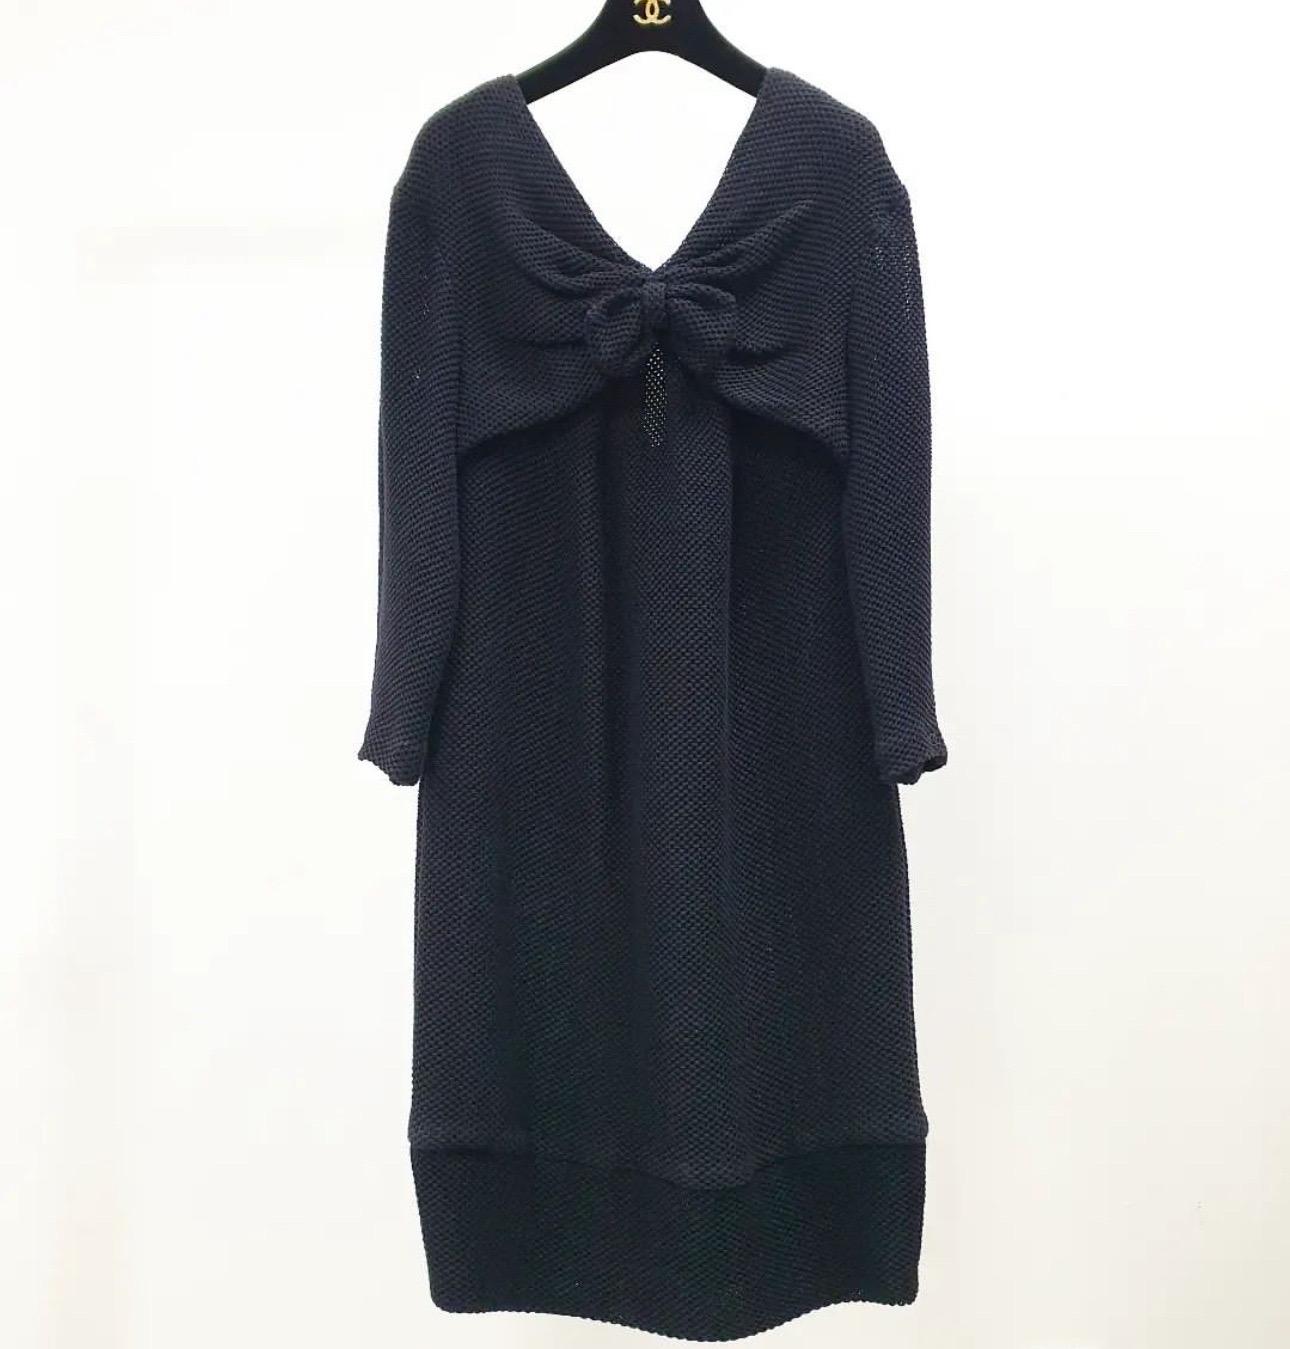 Chanel 2013 Knit Bow Dress In Excellent Condition For Sale In Krakow, PL